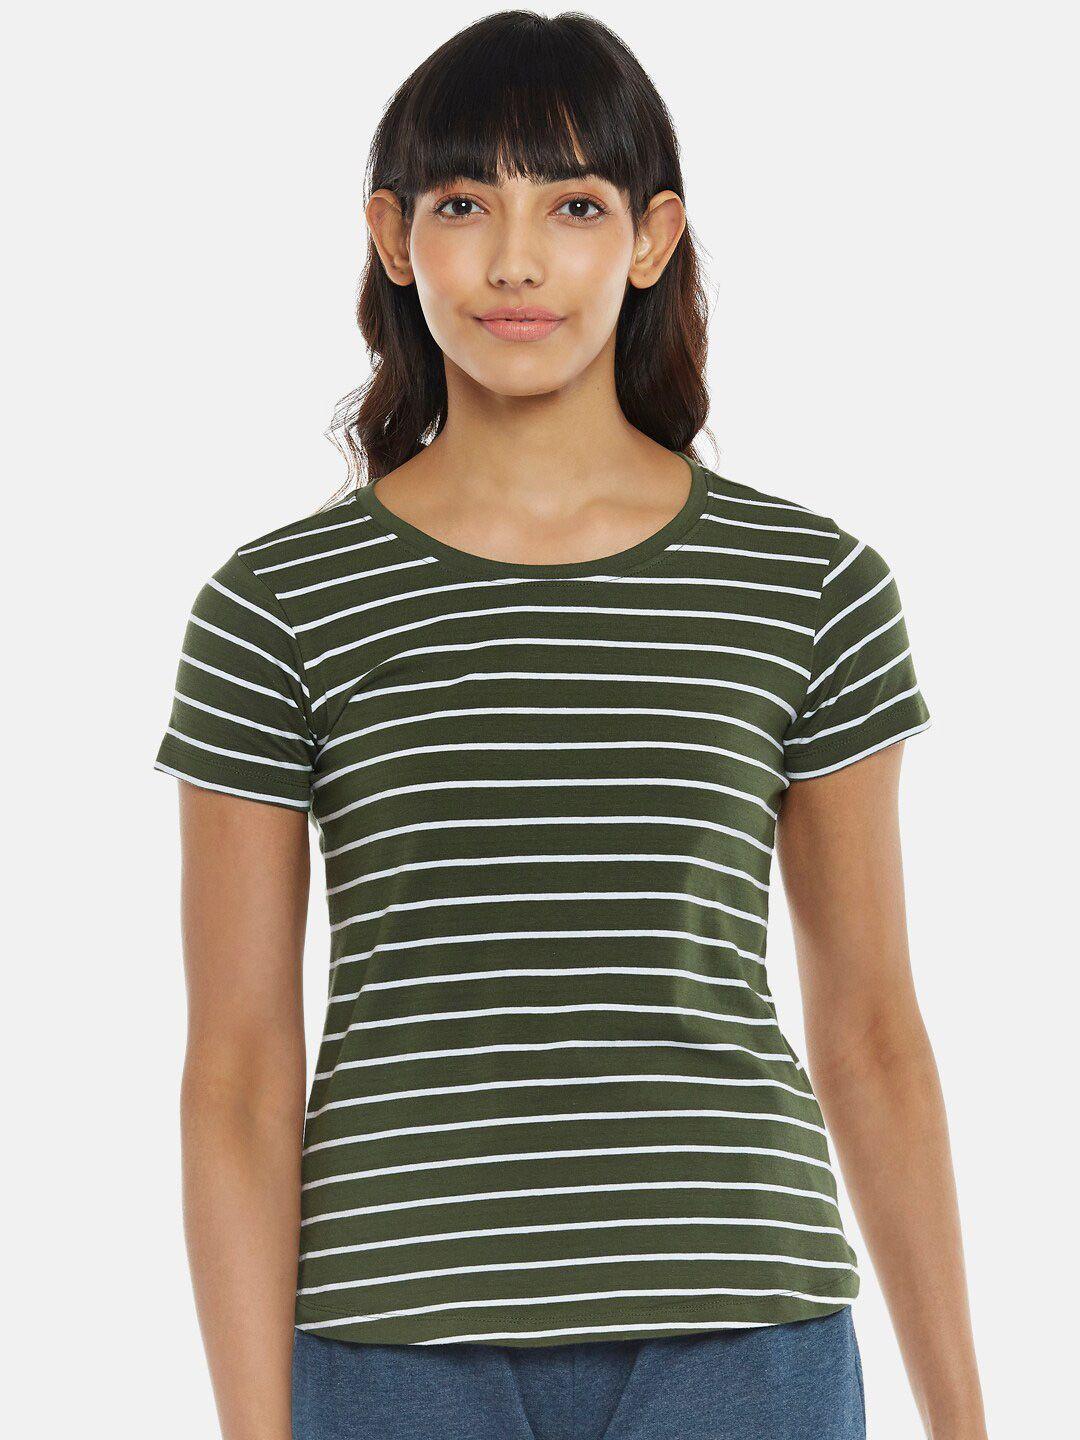 dreamz by pantaloons women olive green striped pure cotton top